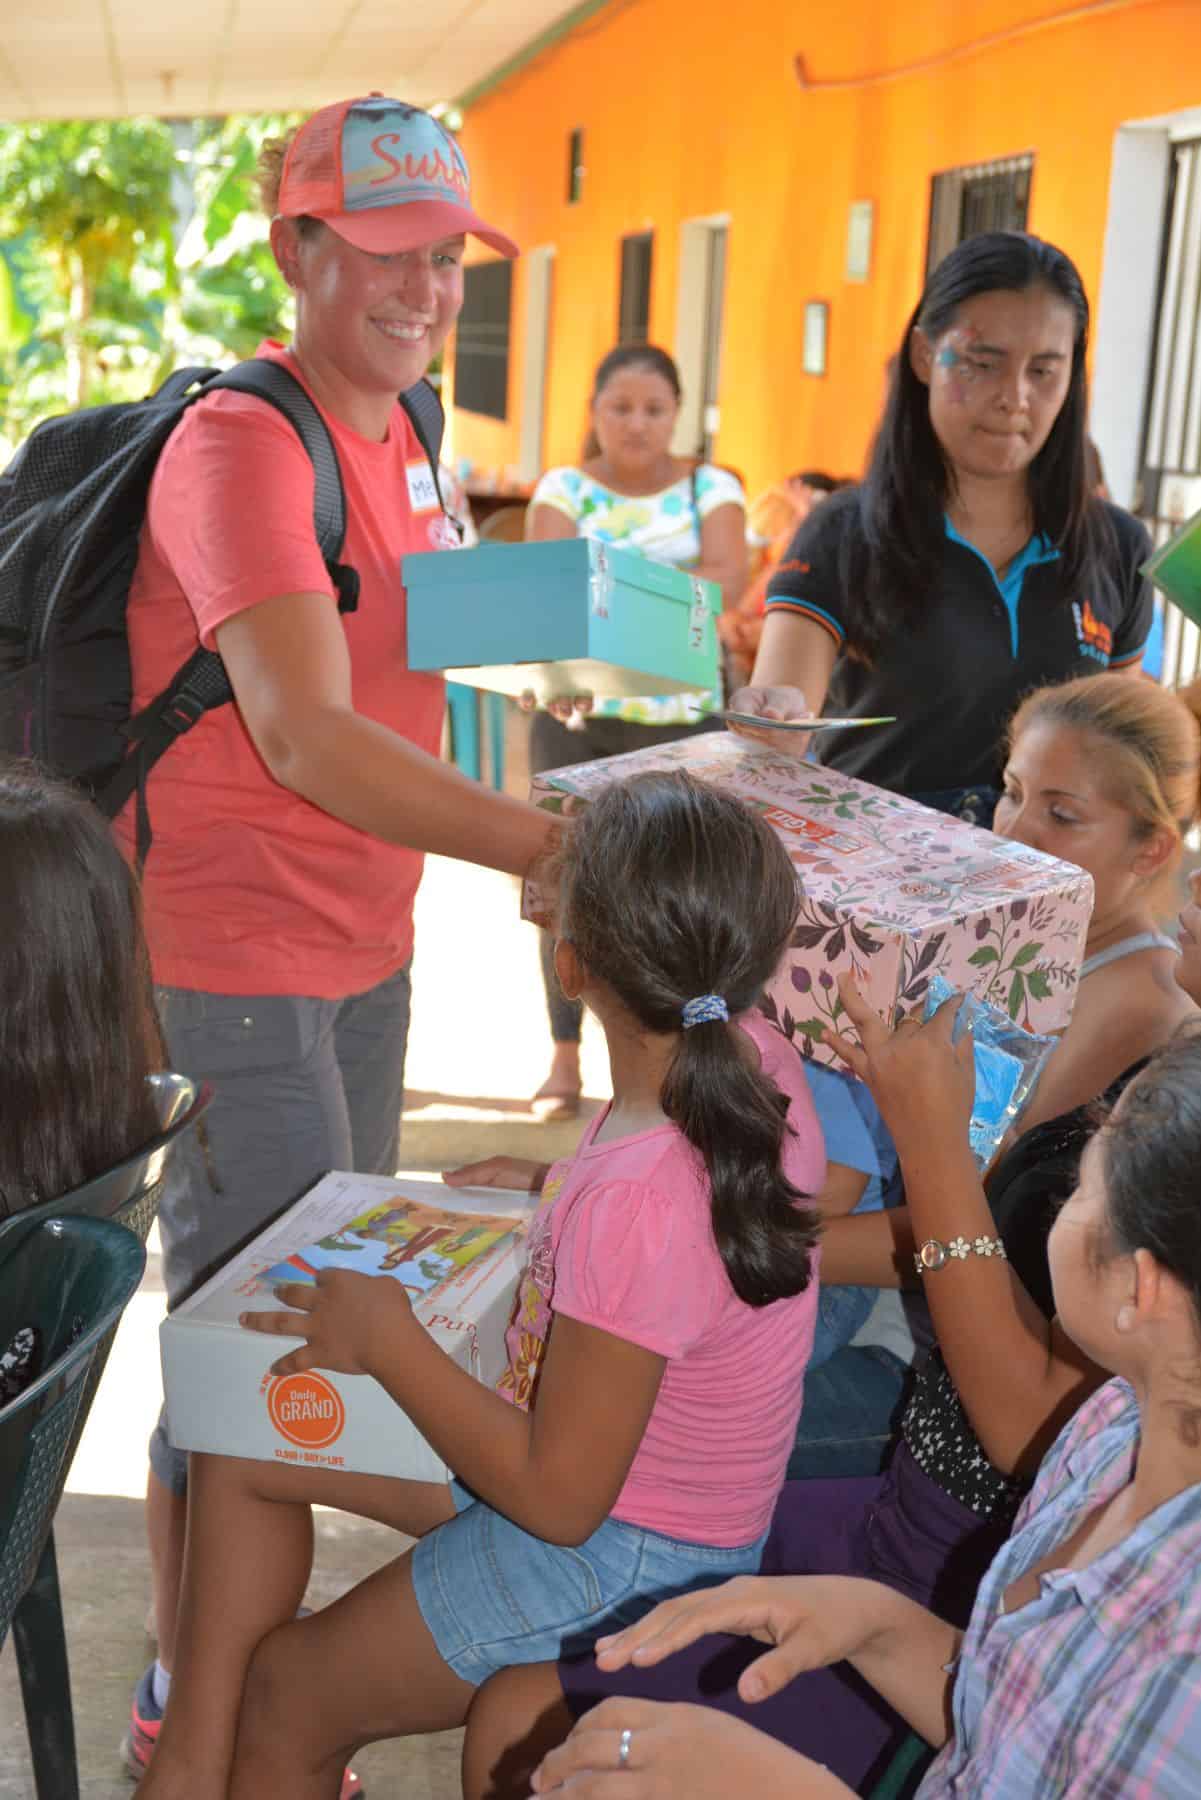 Melody Borgstrom was among a group of Canadians who travelled to El Salvador with Samaritan’s Purse to distribute Operation Christmas Child shoeboxes and see The Greatest Journey in action.